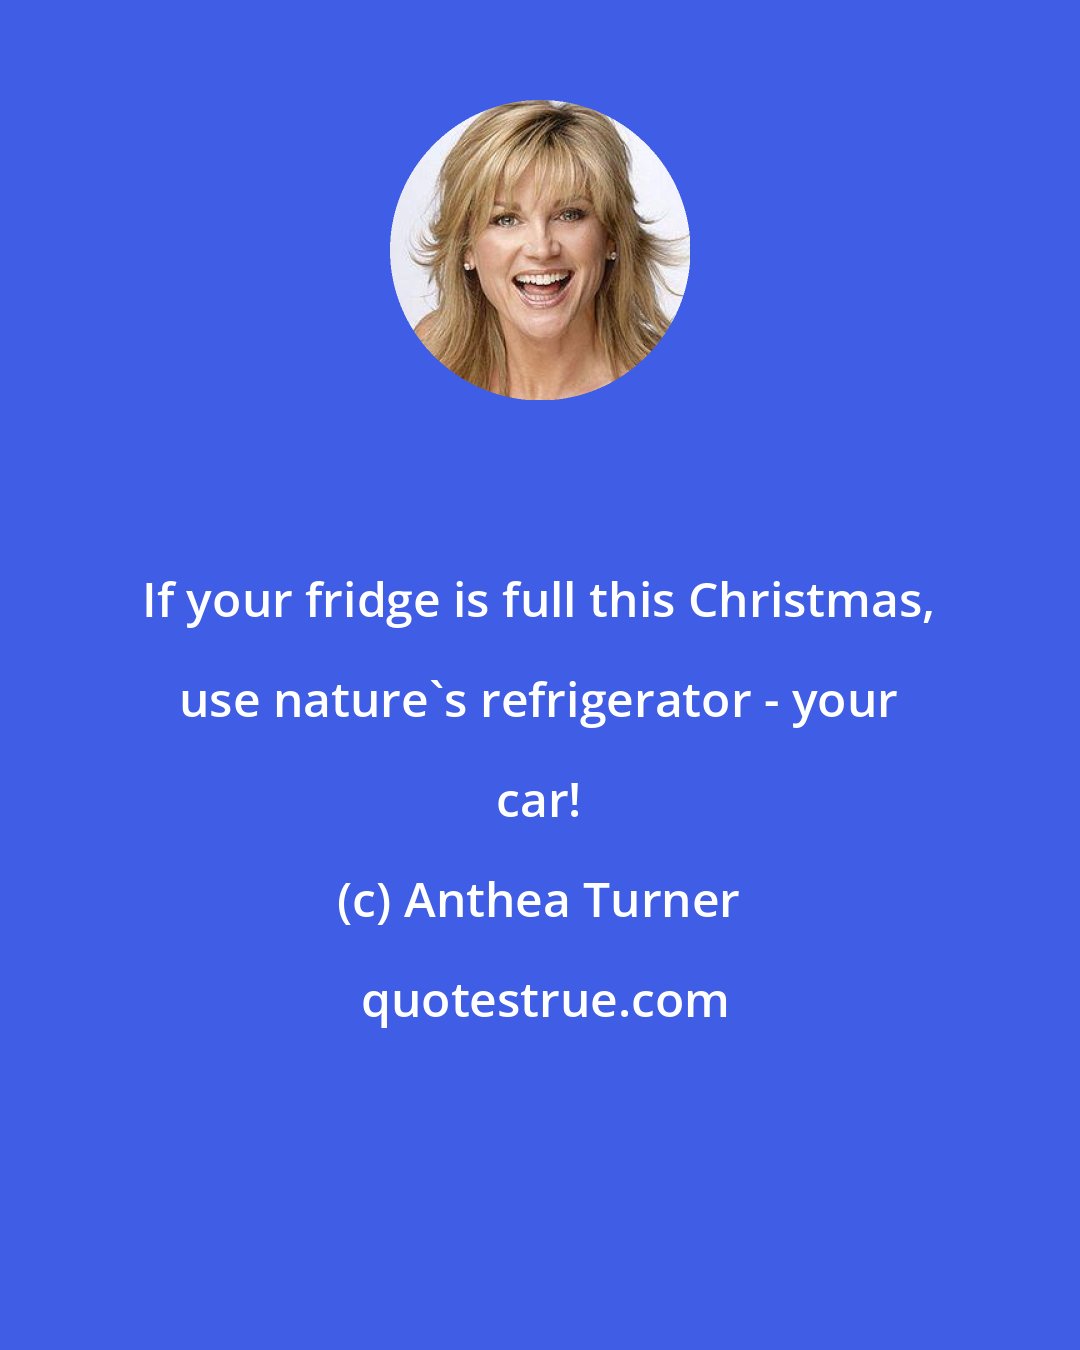 Anthea Turner: If your fridge is full this Christmas, use nature's refrigerator - your car!